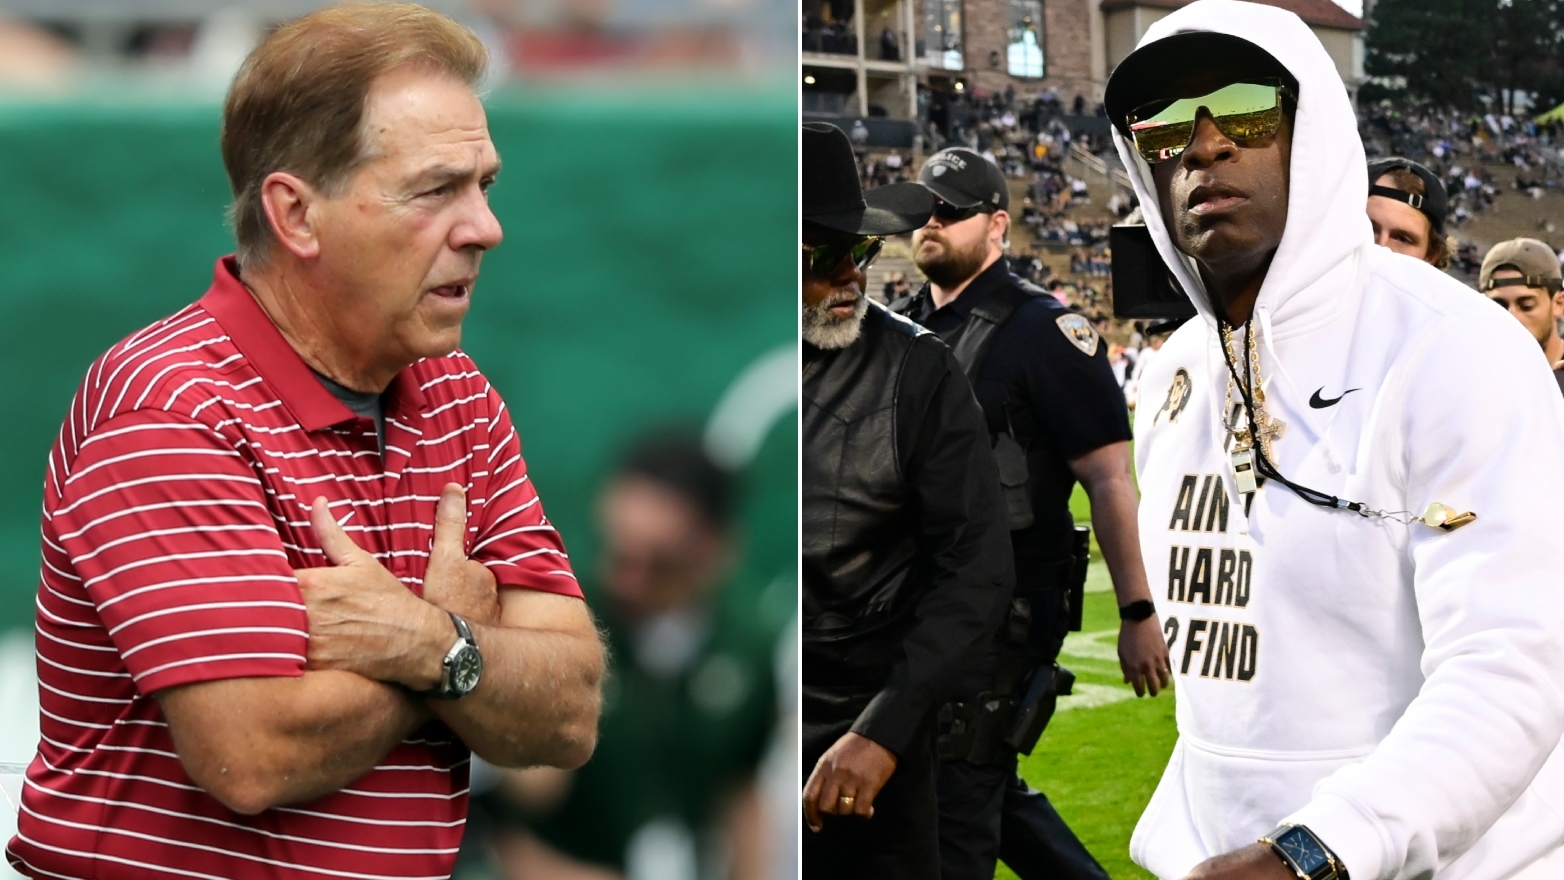 Saban: 'I have a tremendous amount of respect for Deion Sanders'